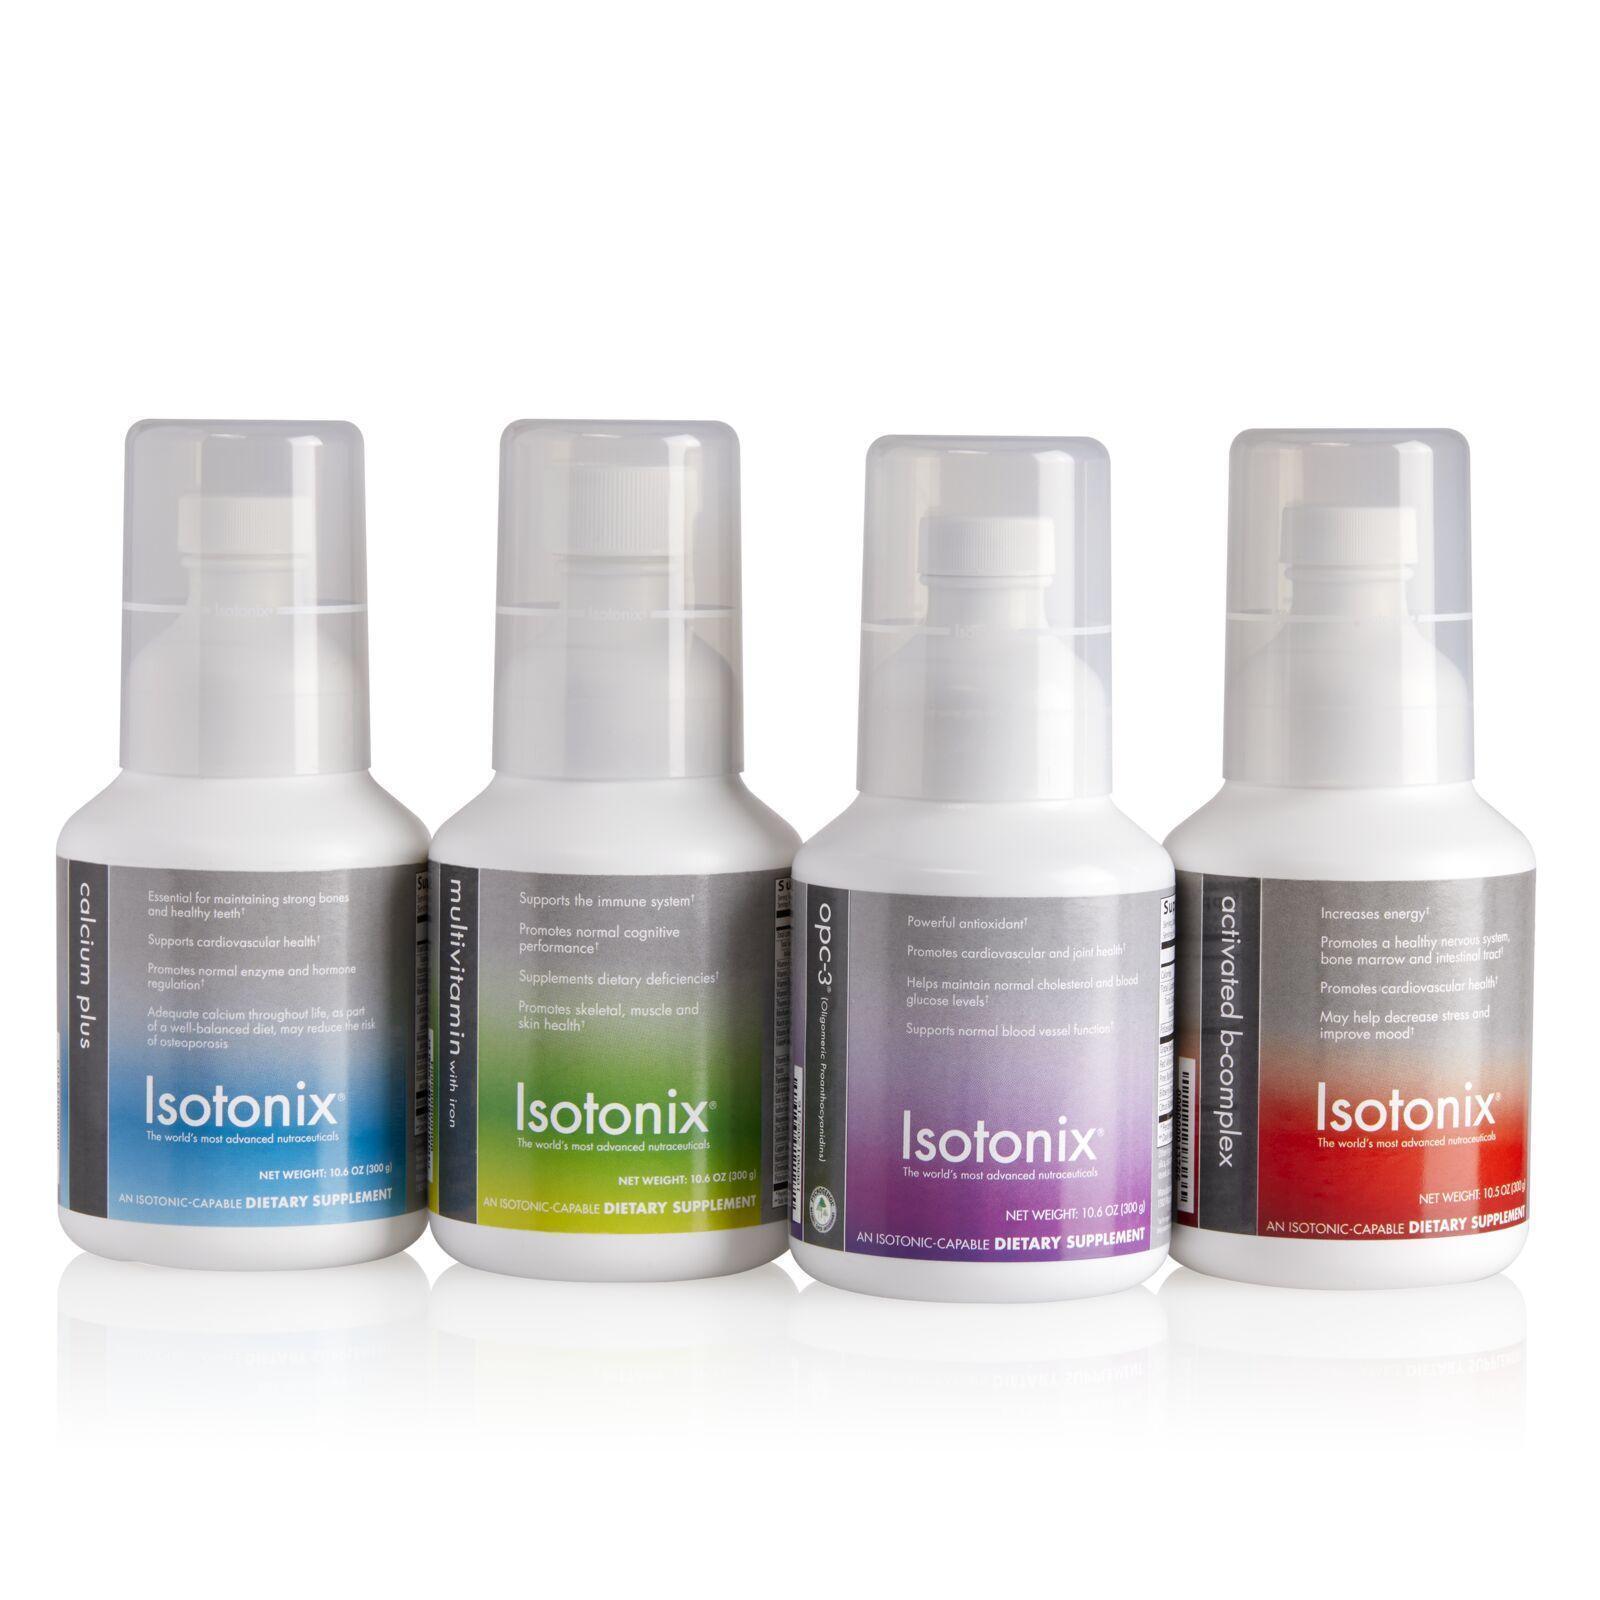 Isotonix Daily Essentials Kit (With Iron),Top 5 Customer Favorite, Product Tested NO Detectable GMO, Vegetarian